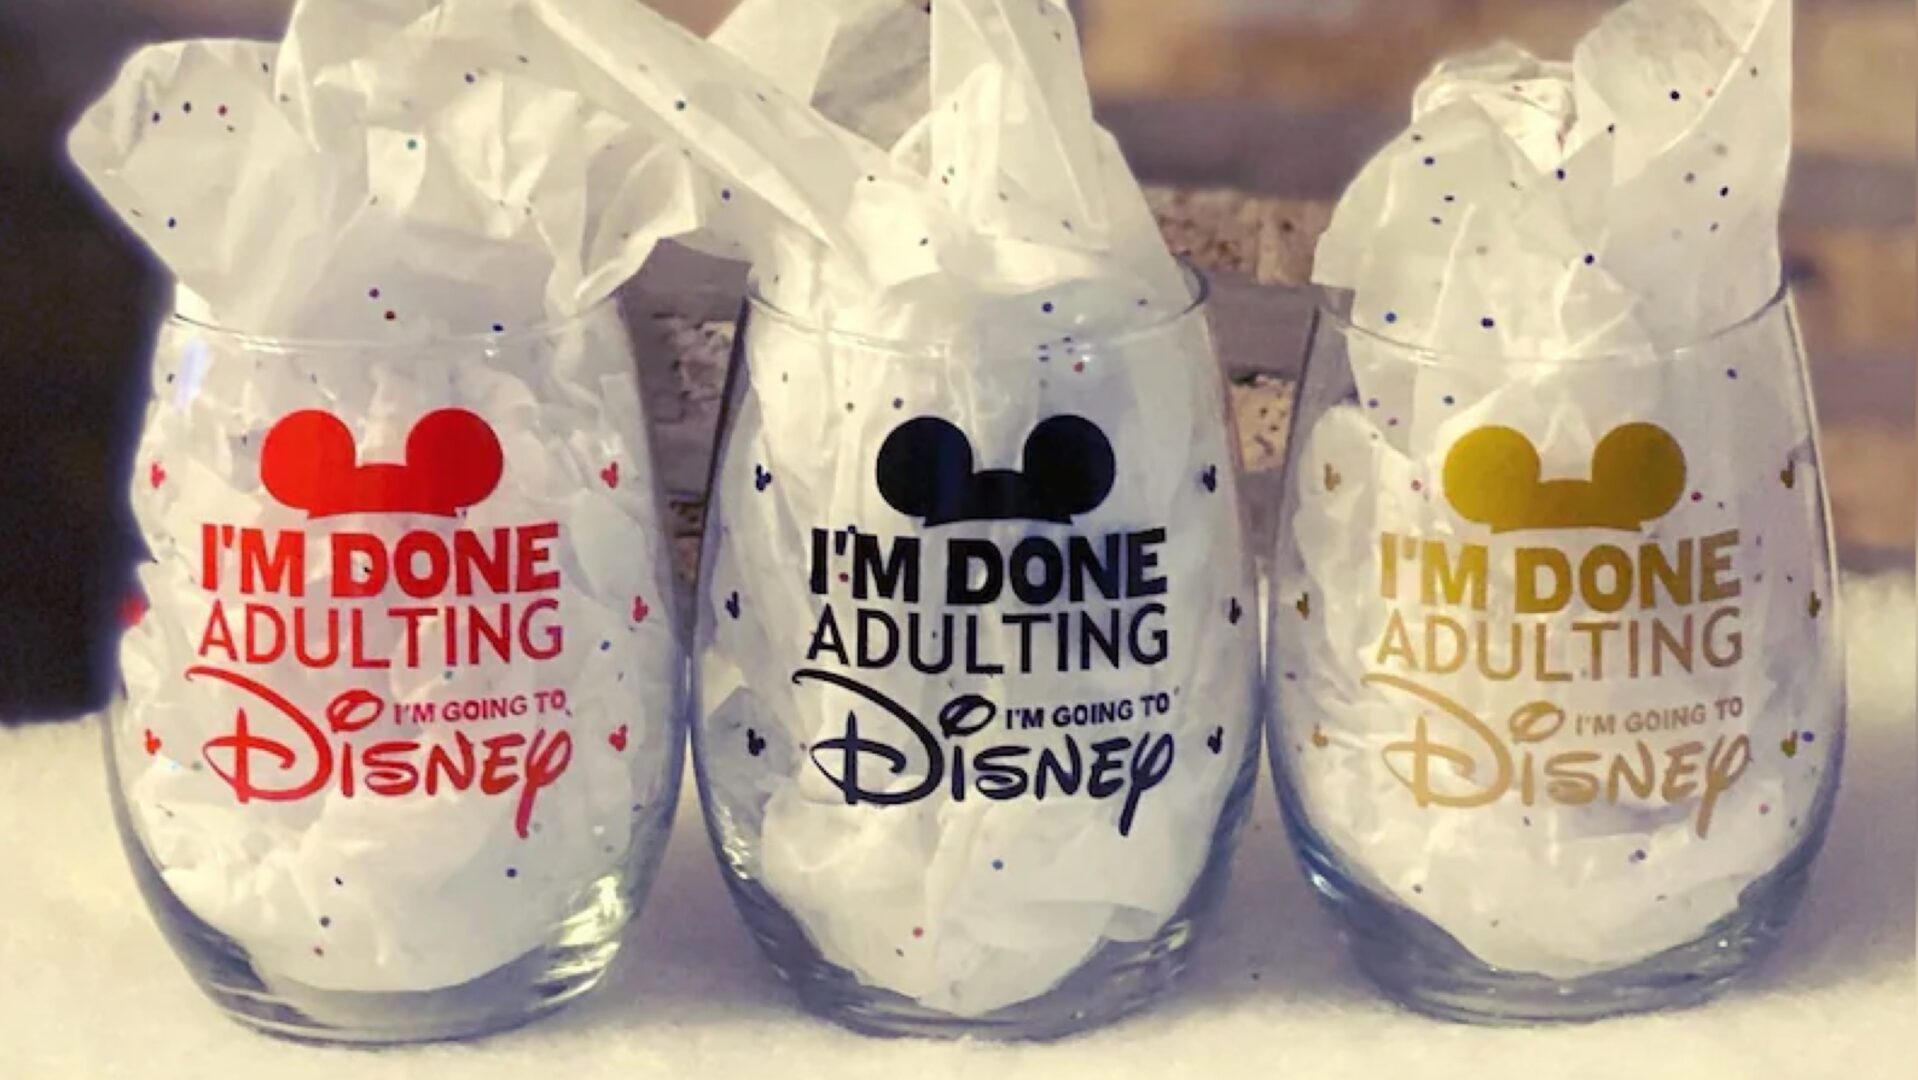 Magical Disney Wine Glass For When You Are Done Adulting!